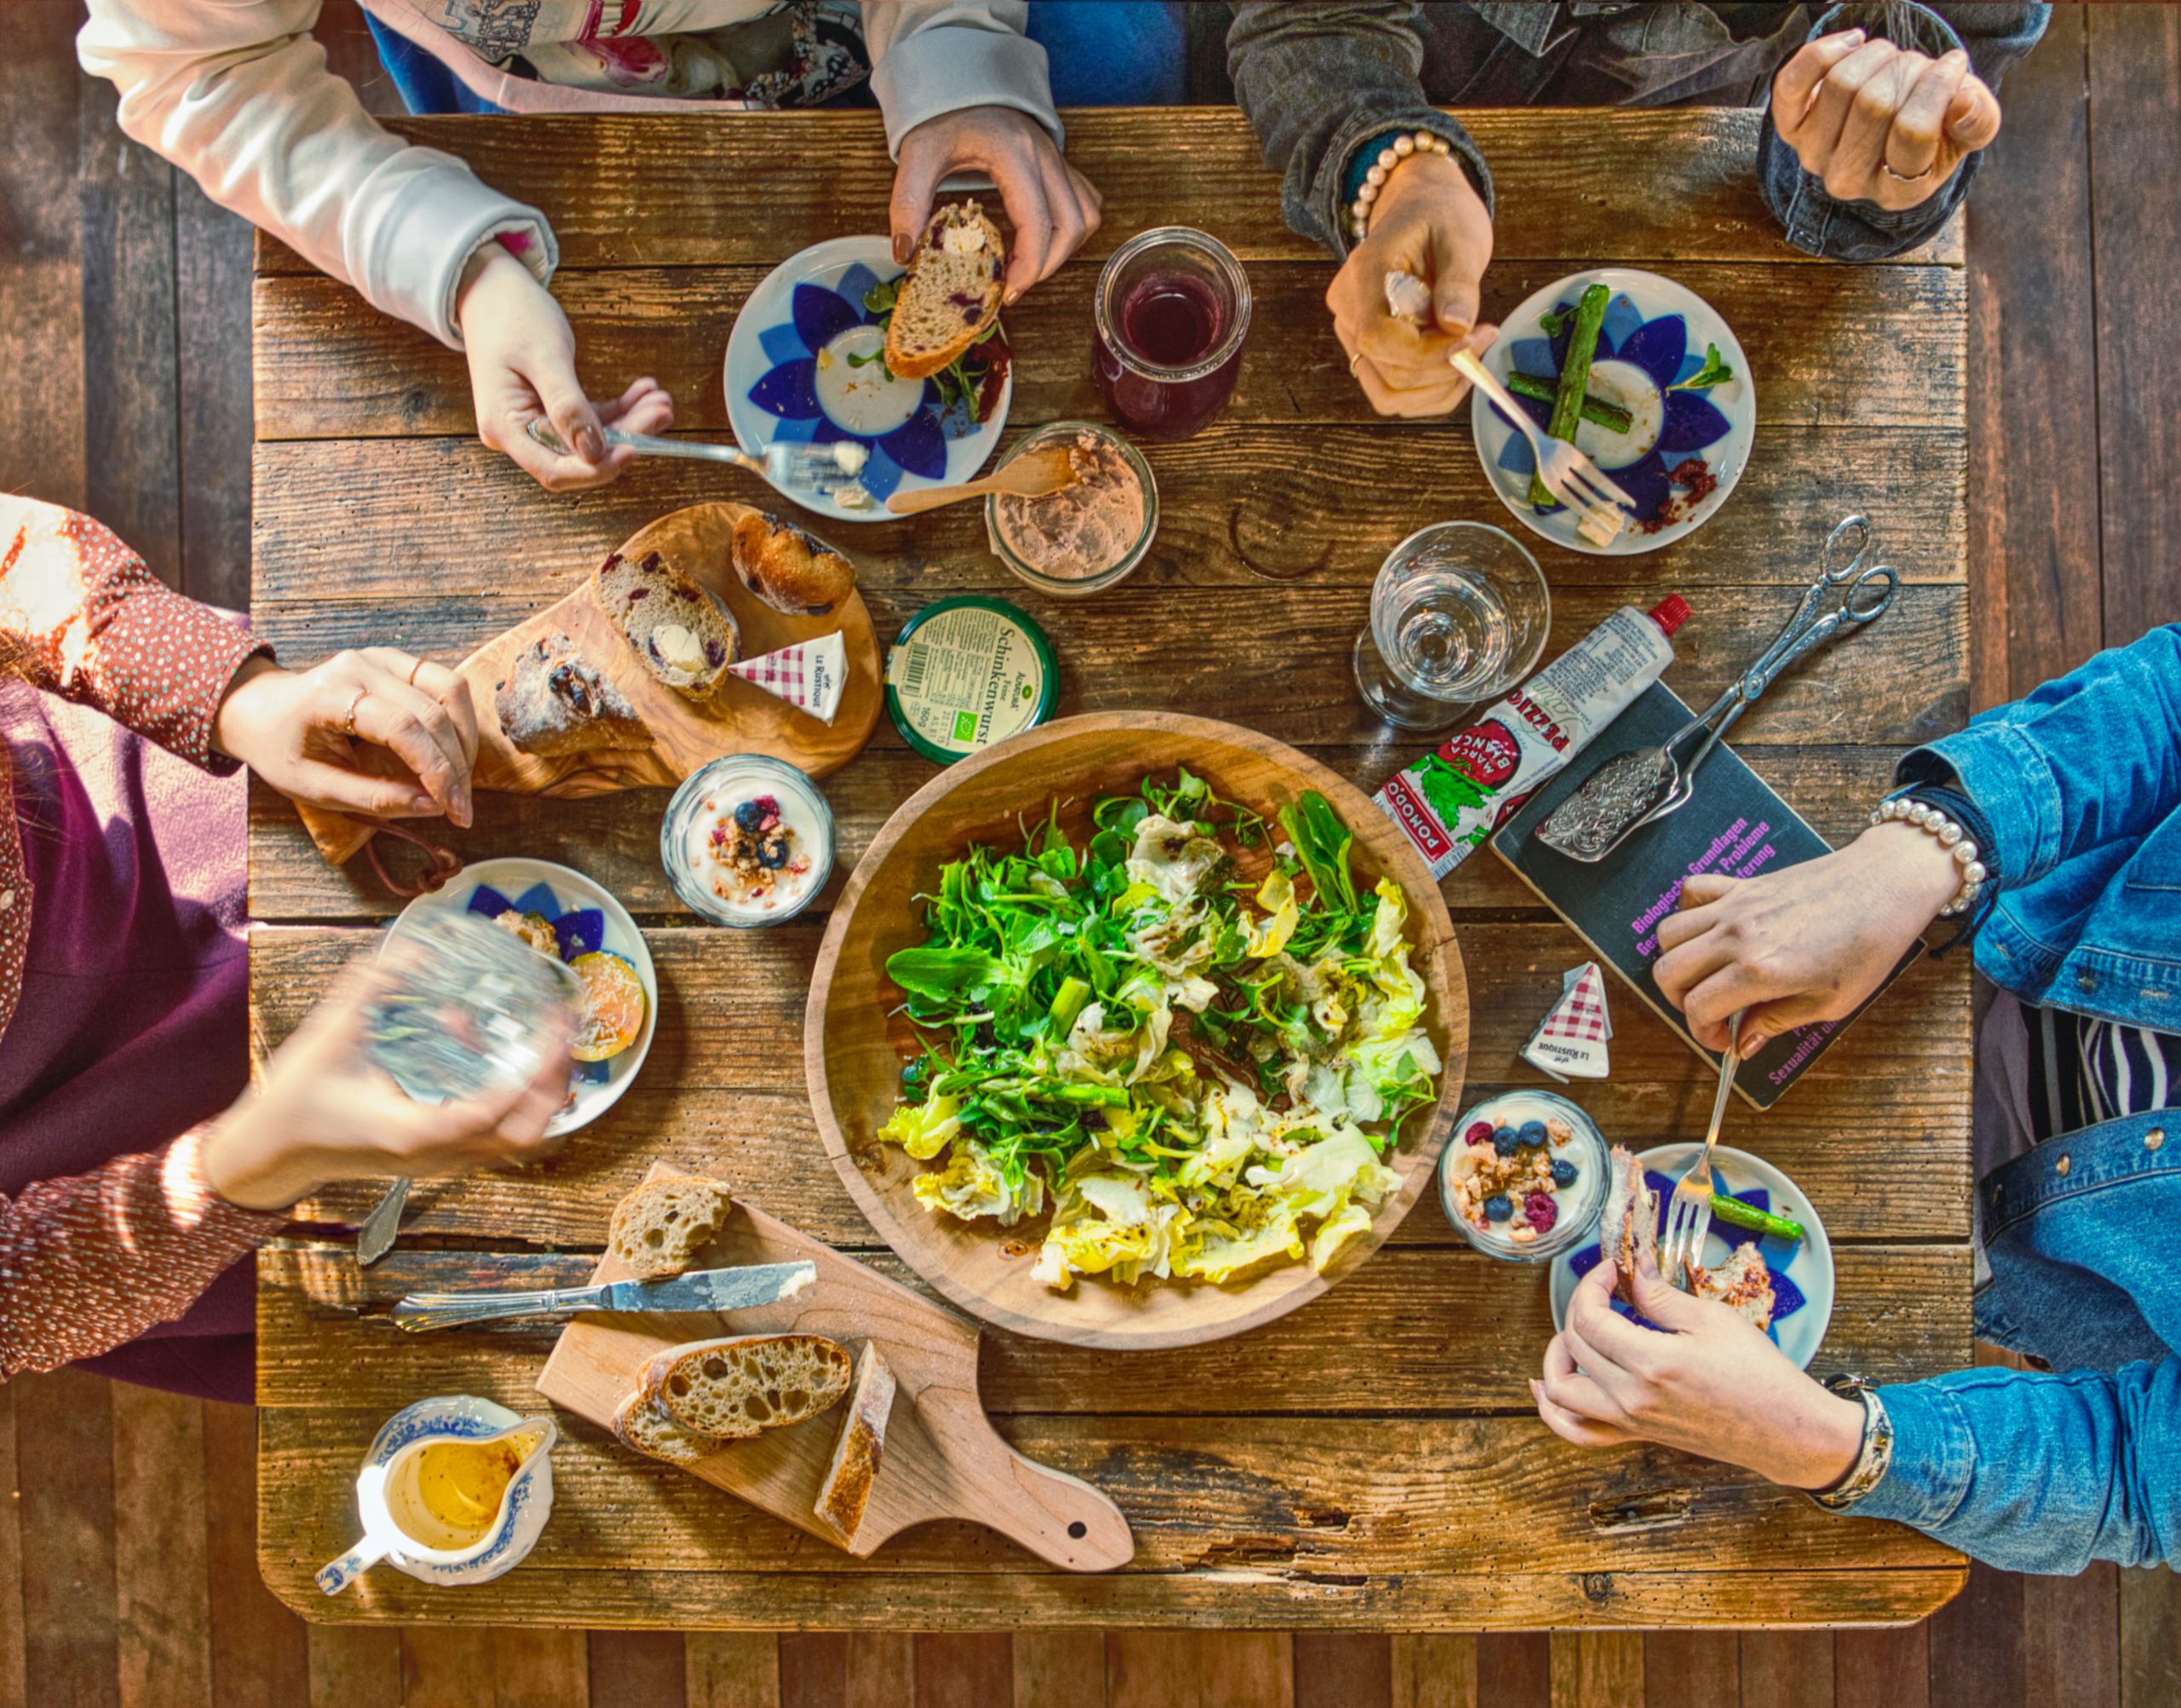 5 ways to practice mindful eating - people eating together